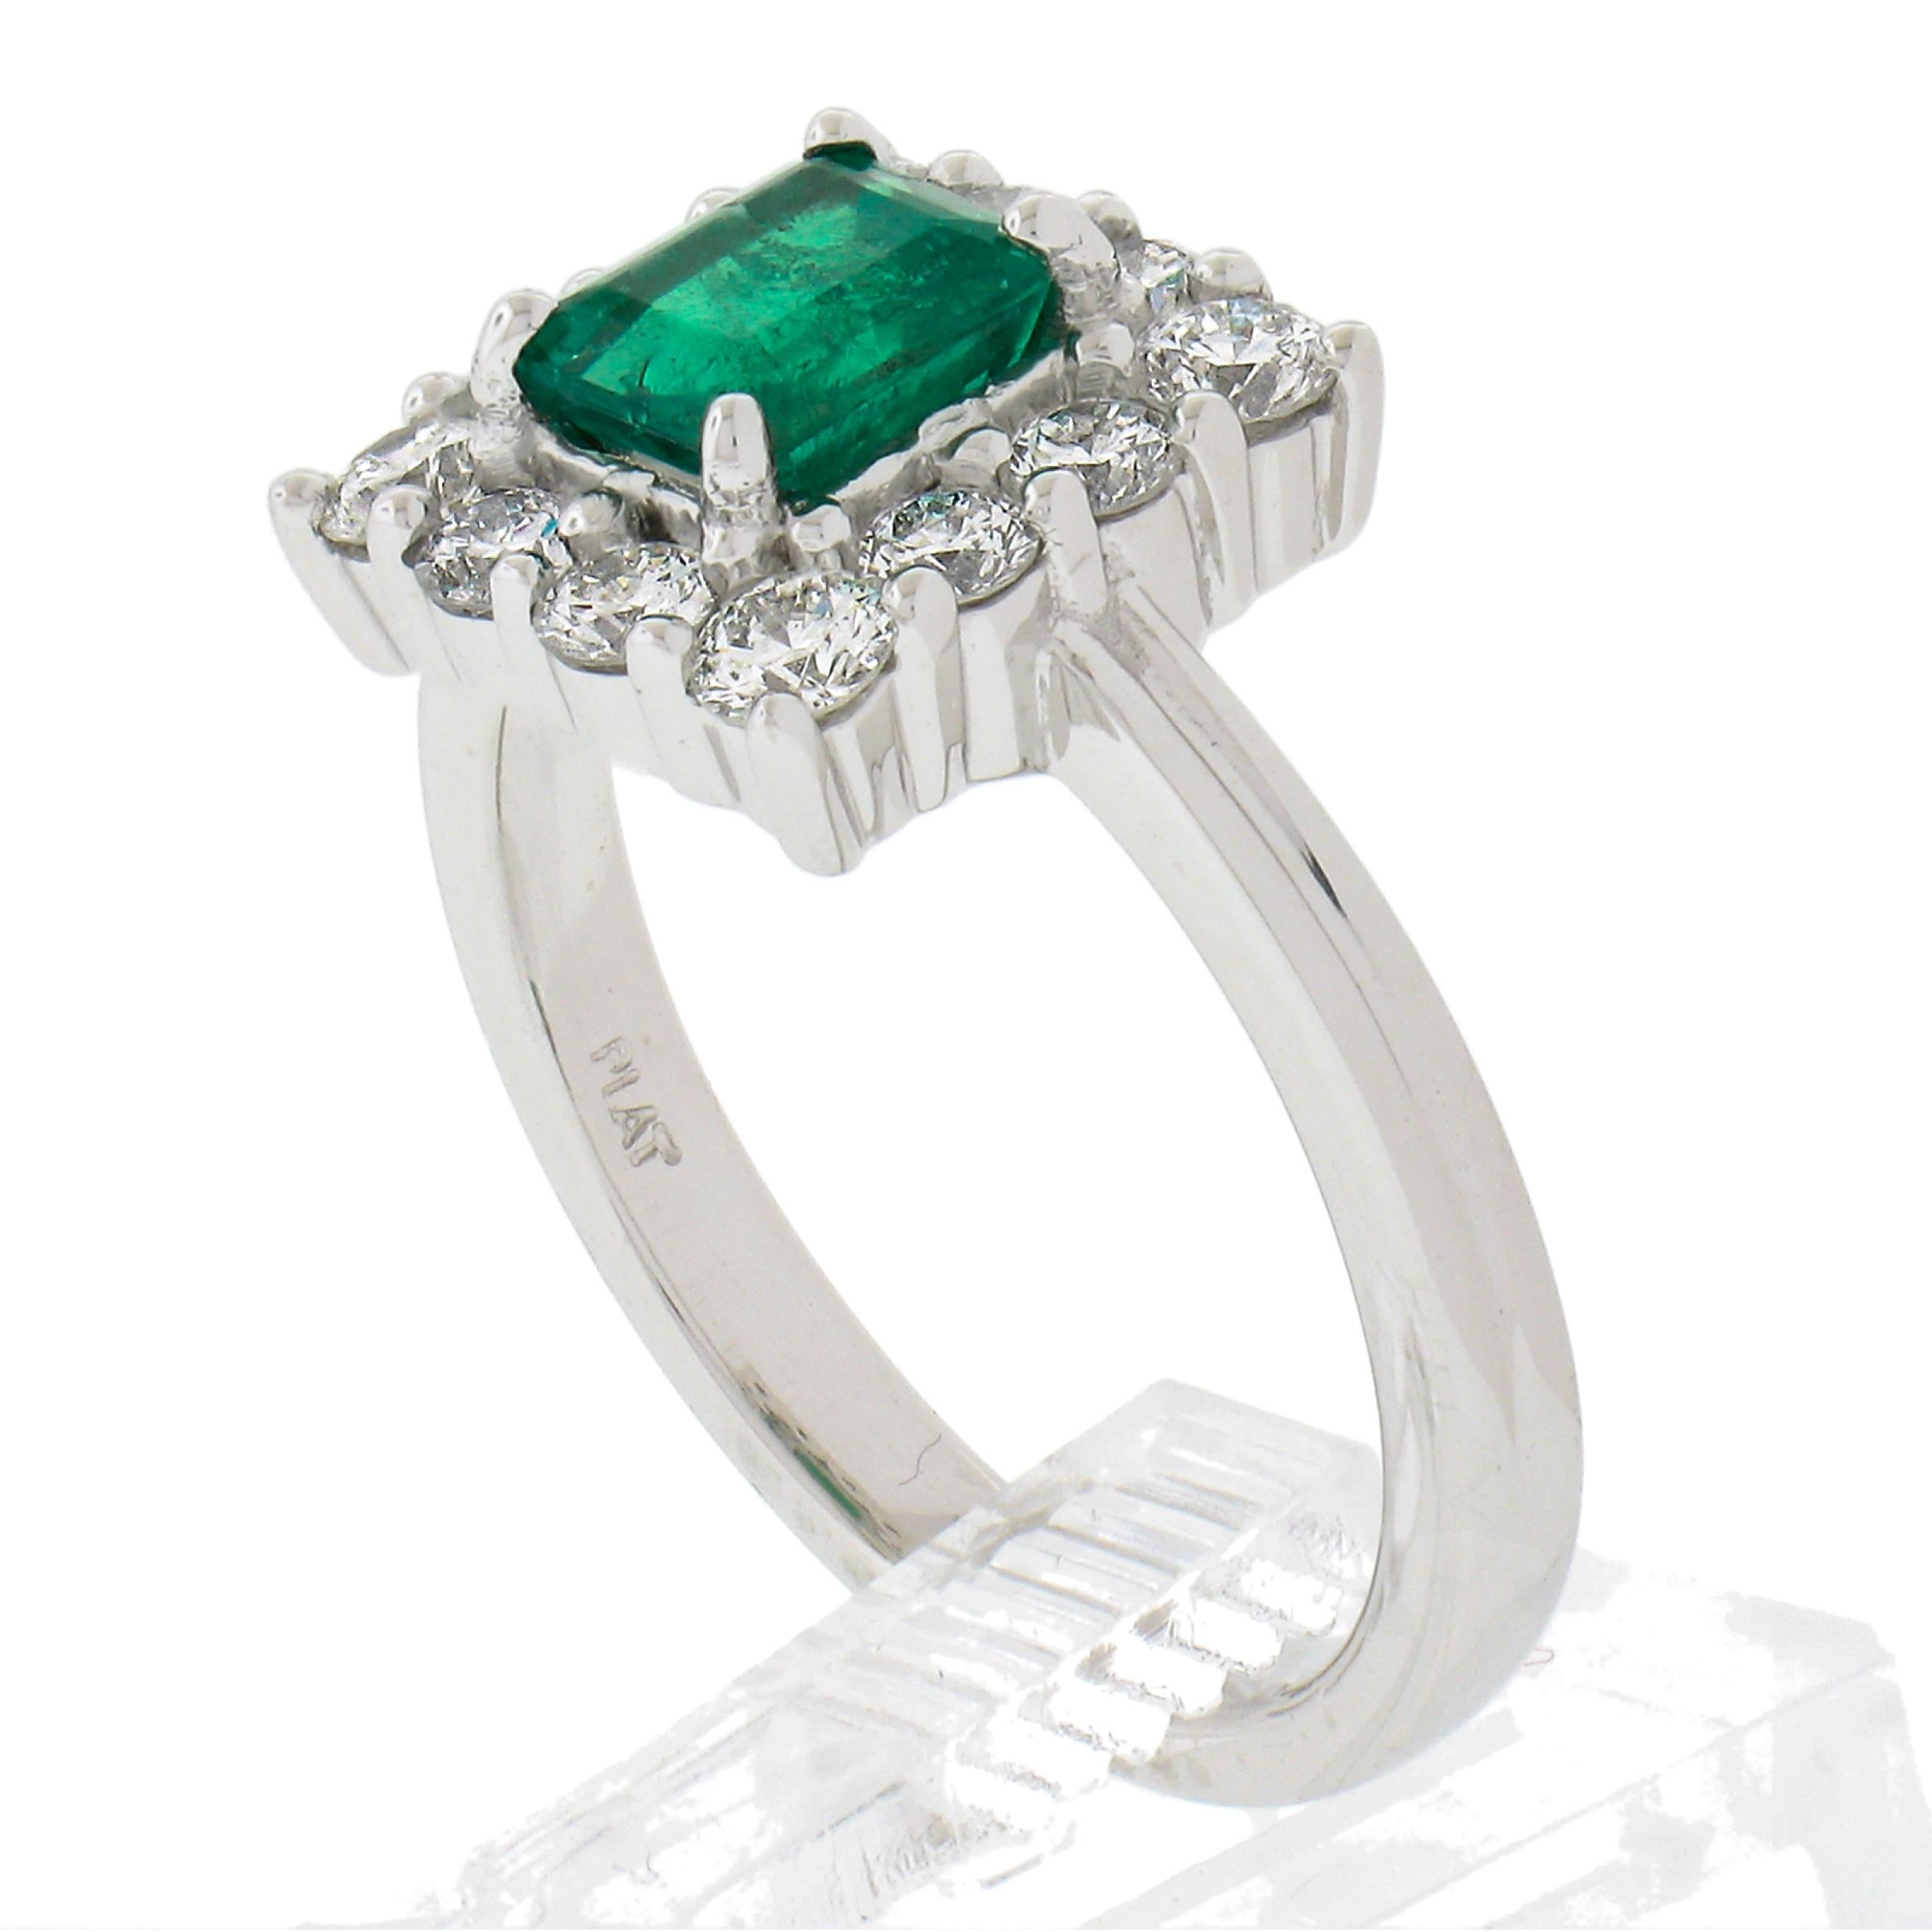 NEW Platinum 1.51ctw GIA Colombian Green Emerald w/ Diamond Halo Cocktail Ring For Sale 4